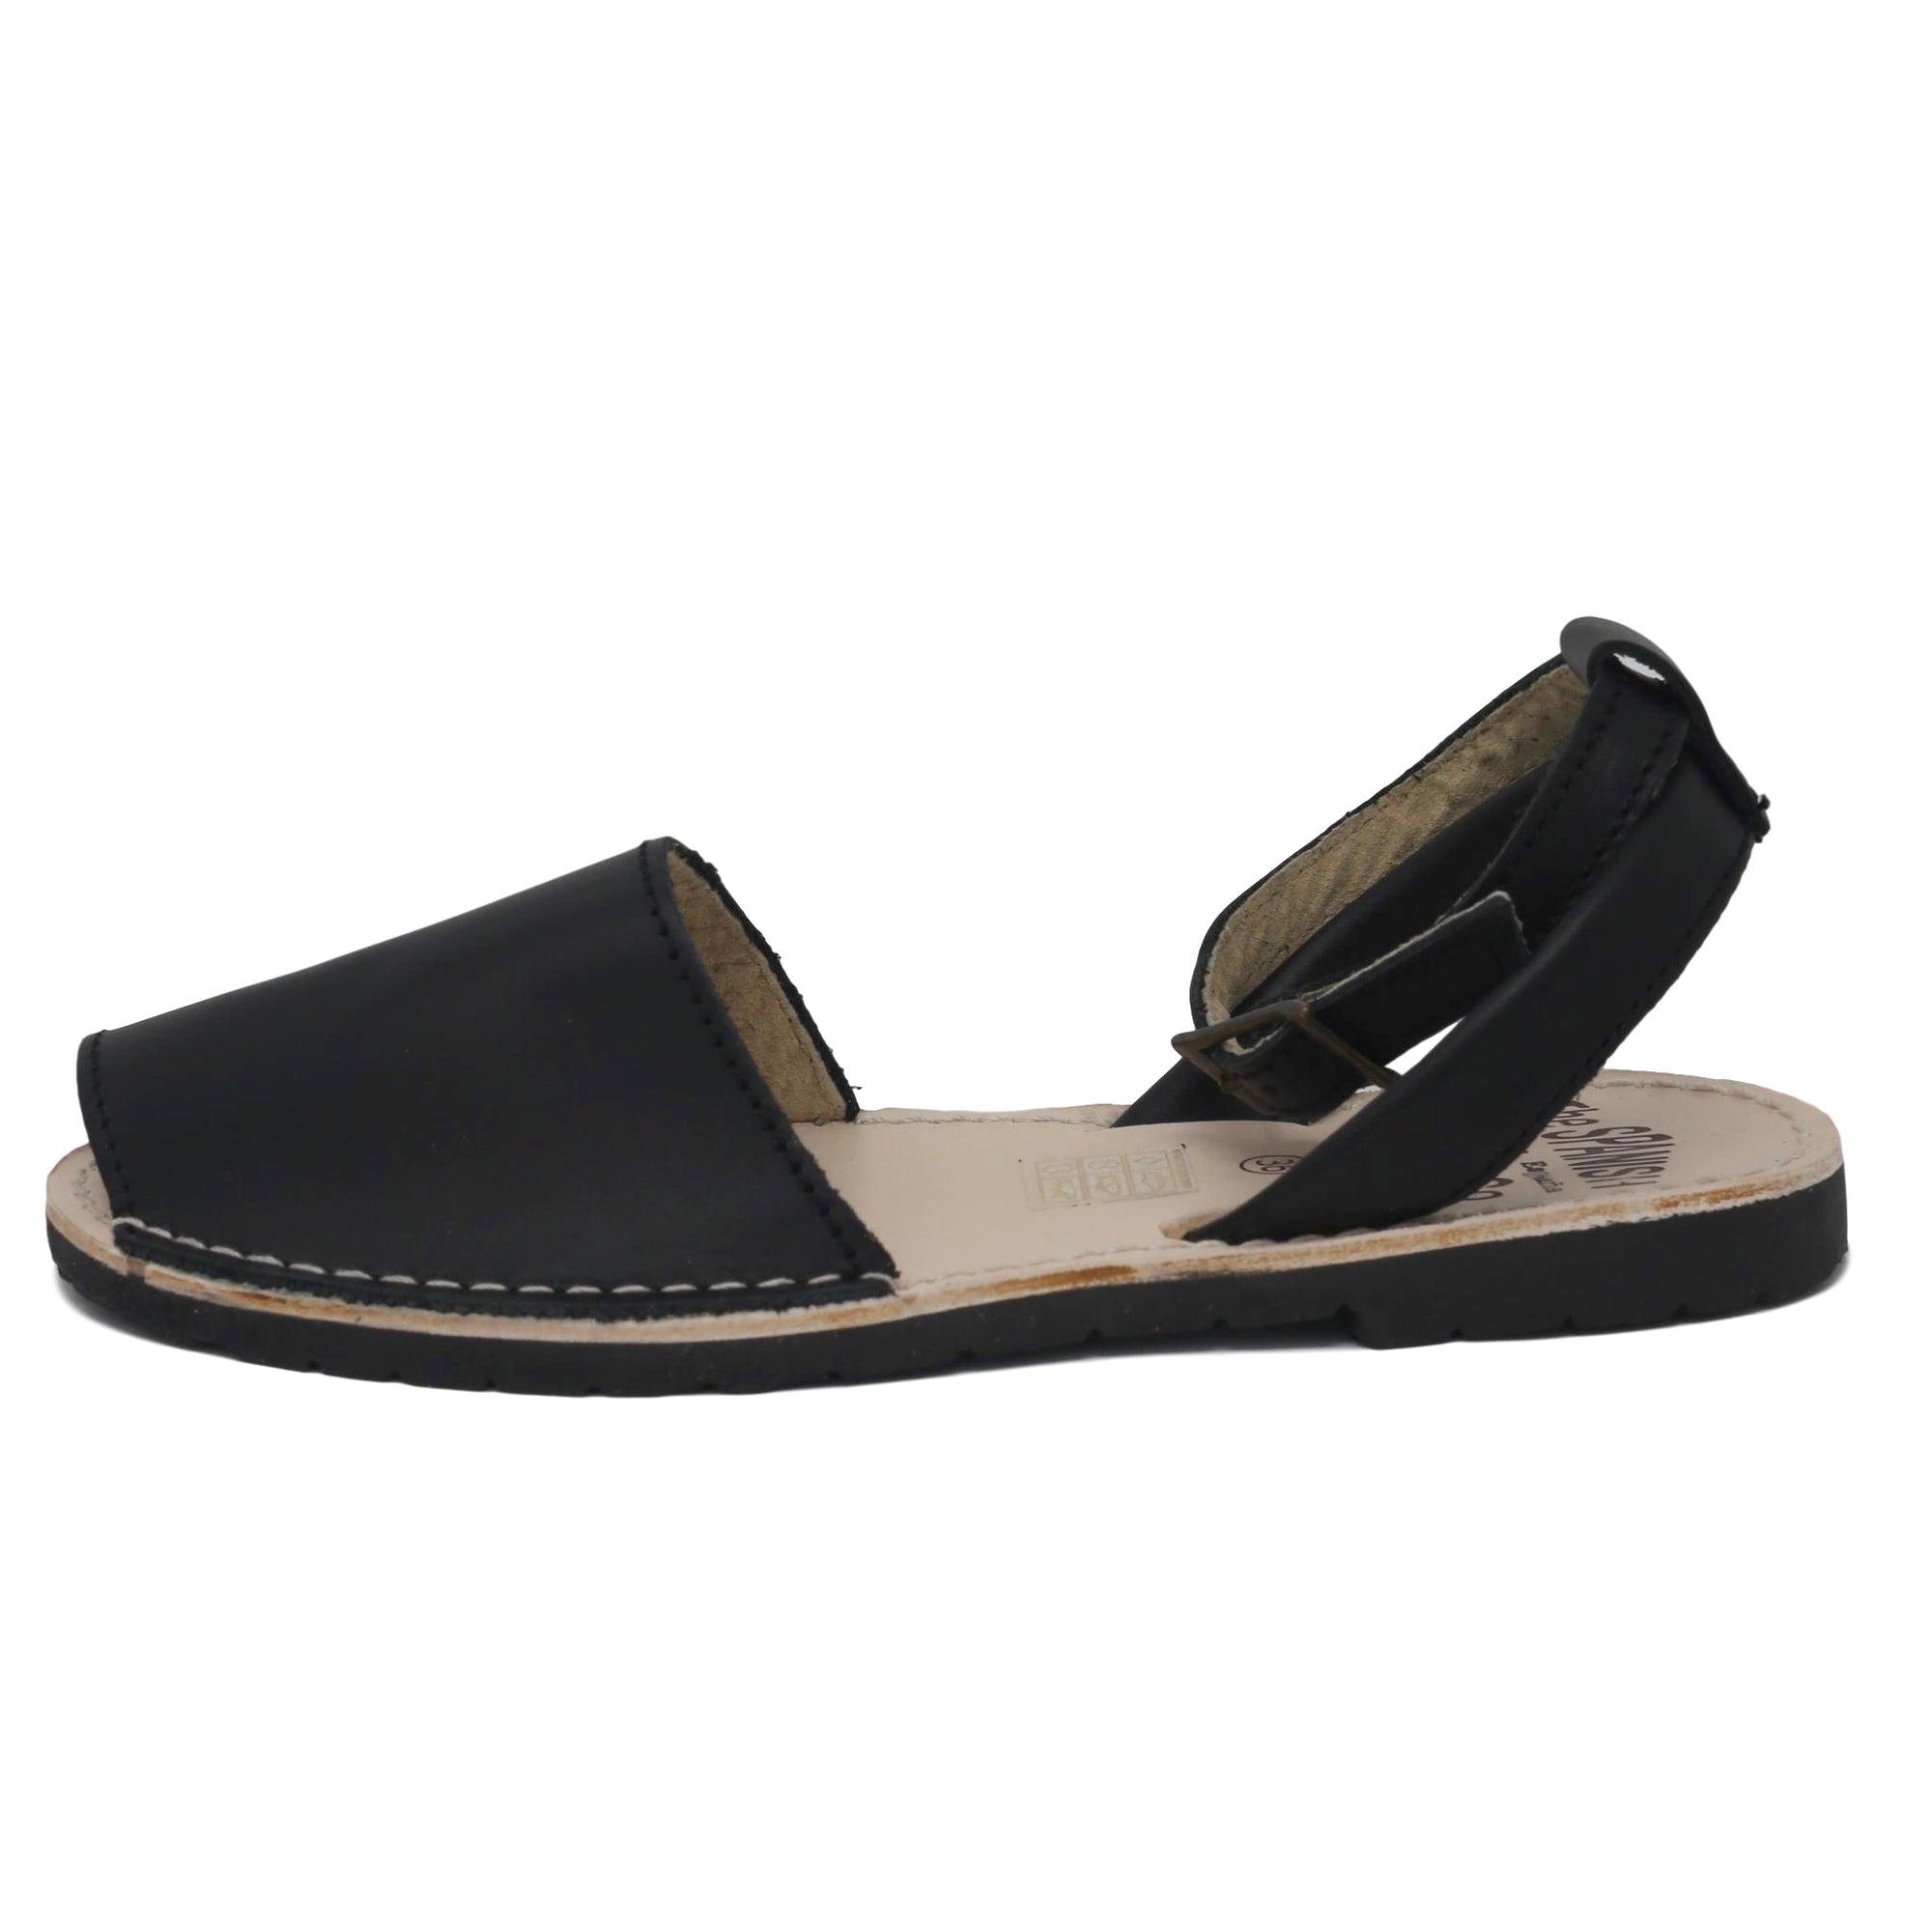 Black sandals with strap